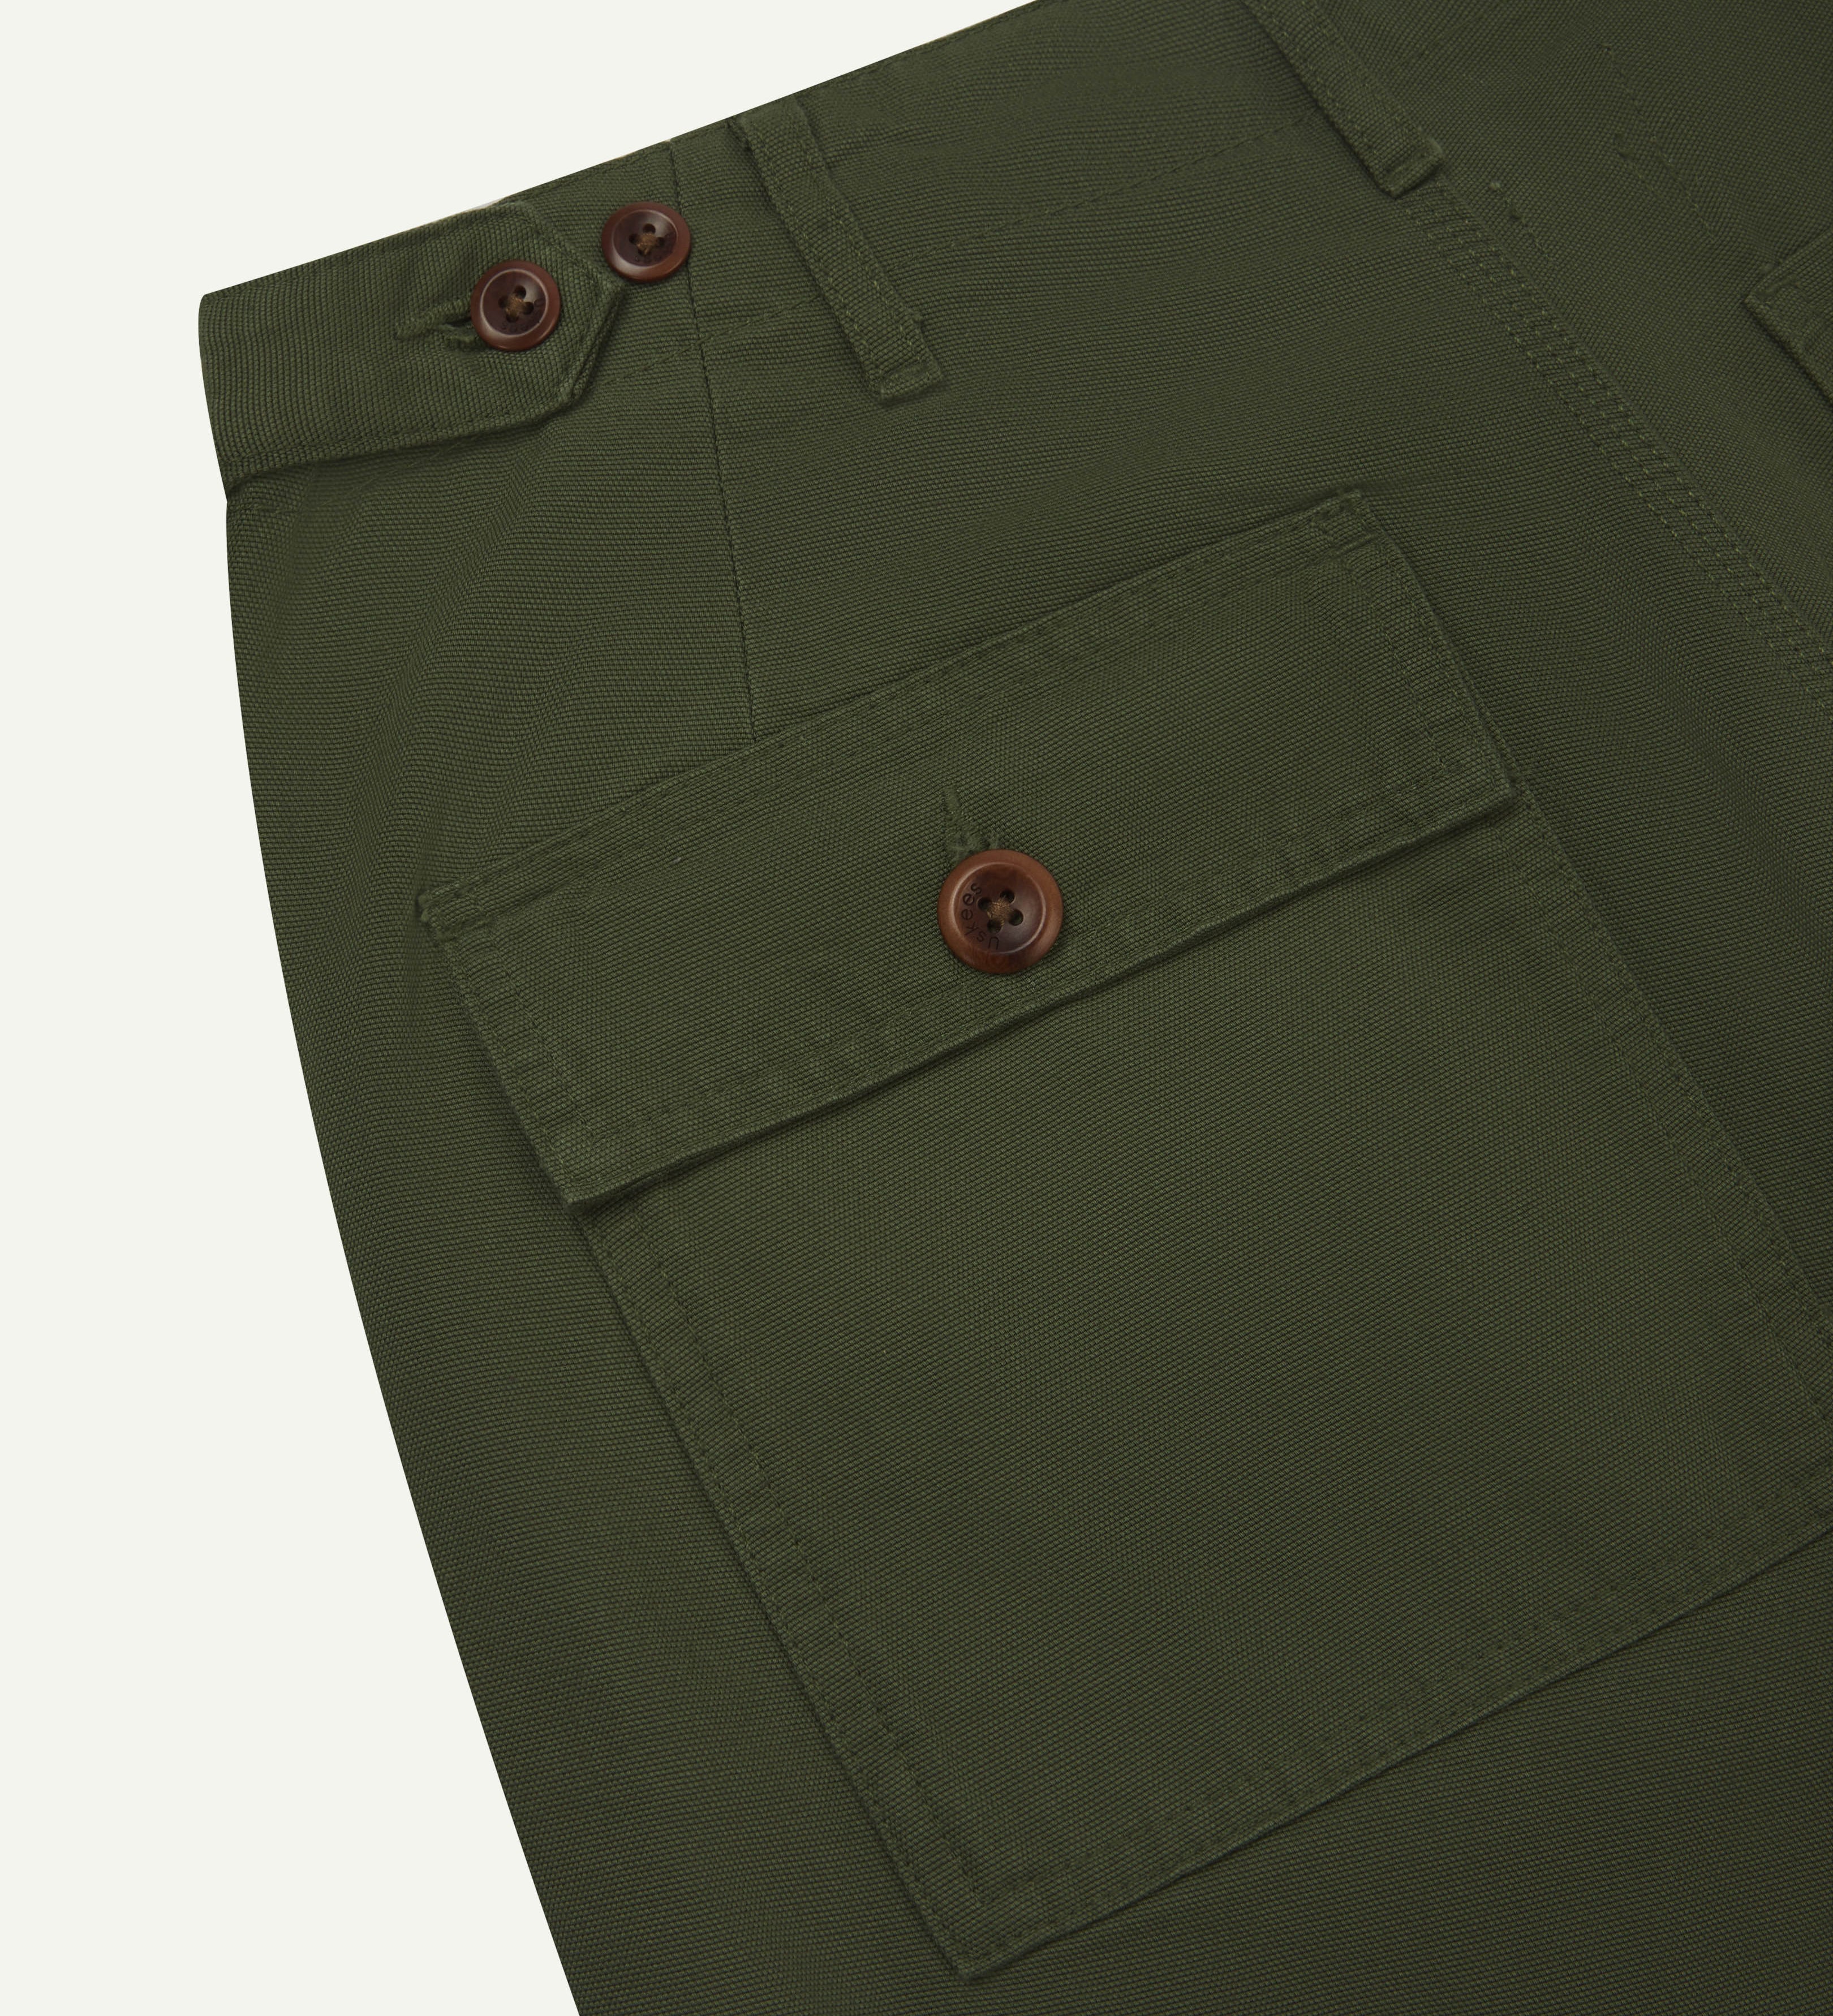 Back shot of #5005 workwear pants in 'coriander' green clearly showing the adjustable waistband, Corozo buttons, belt loops and back pockets. 